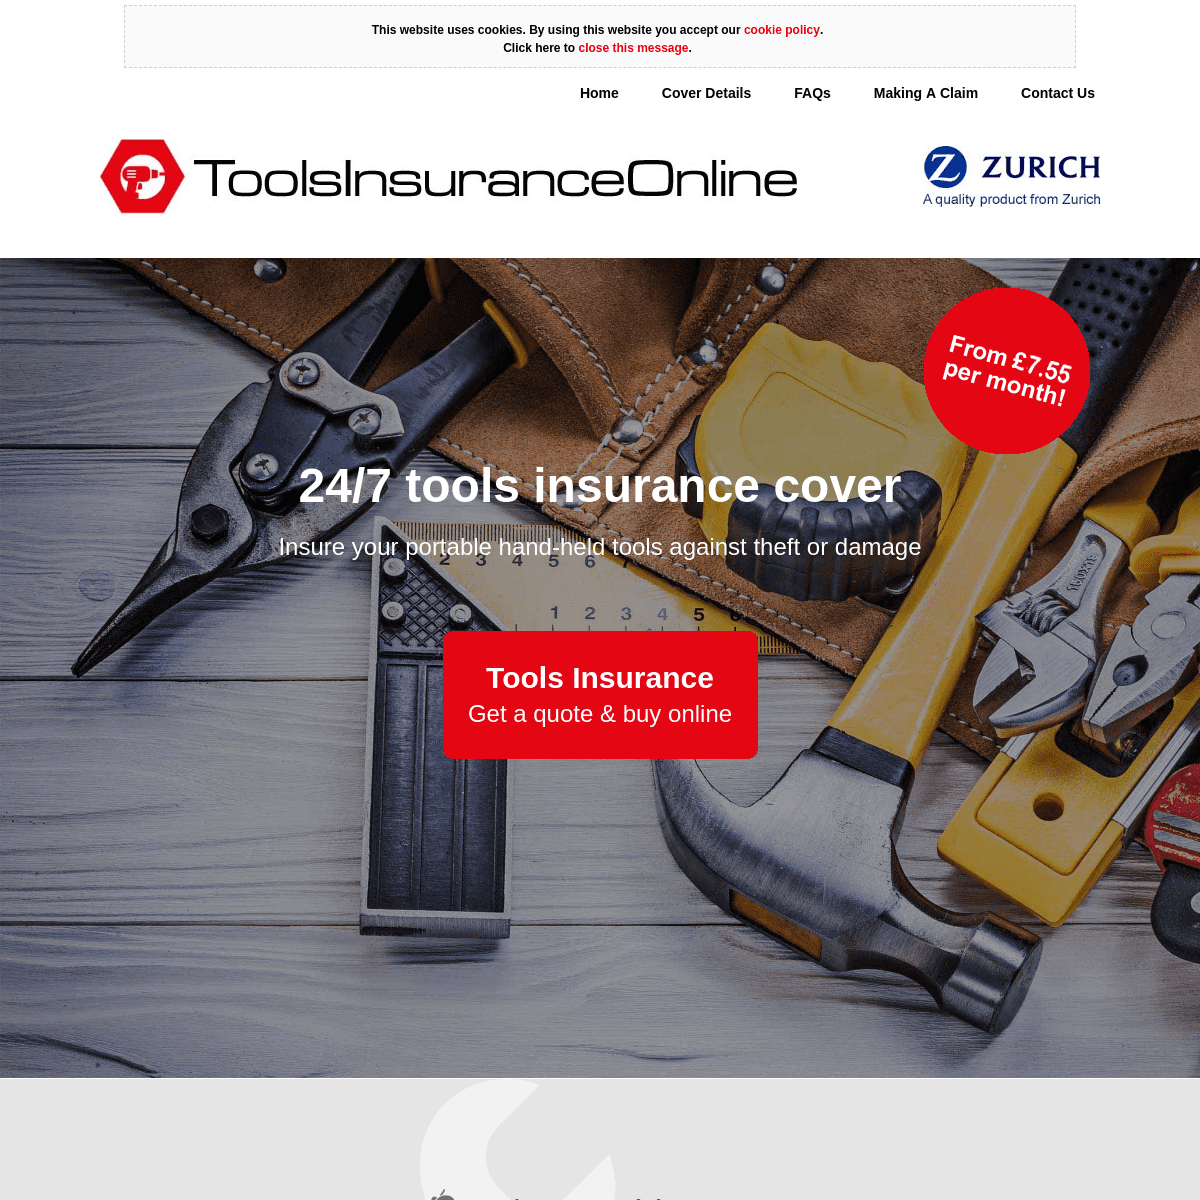 A complete backup of toolsinsuranceonline.com